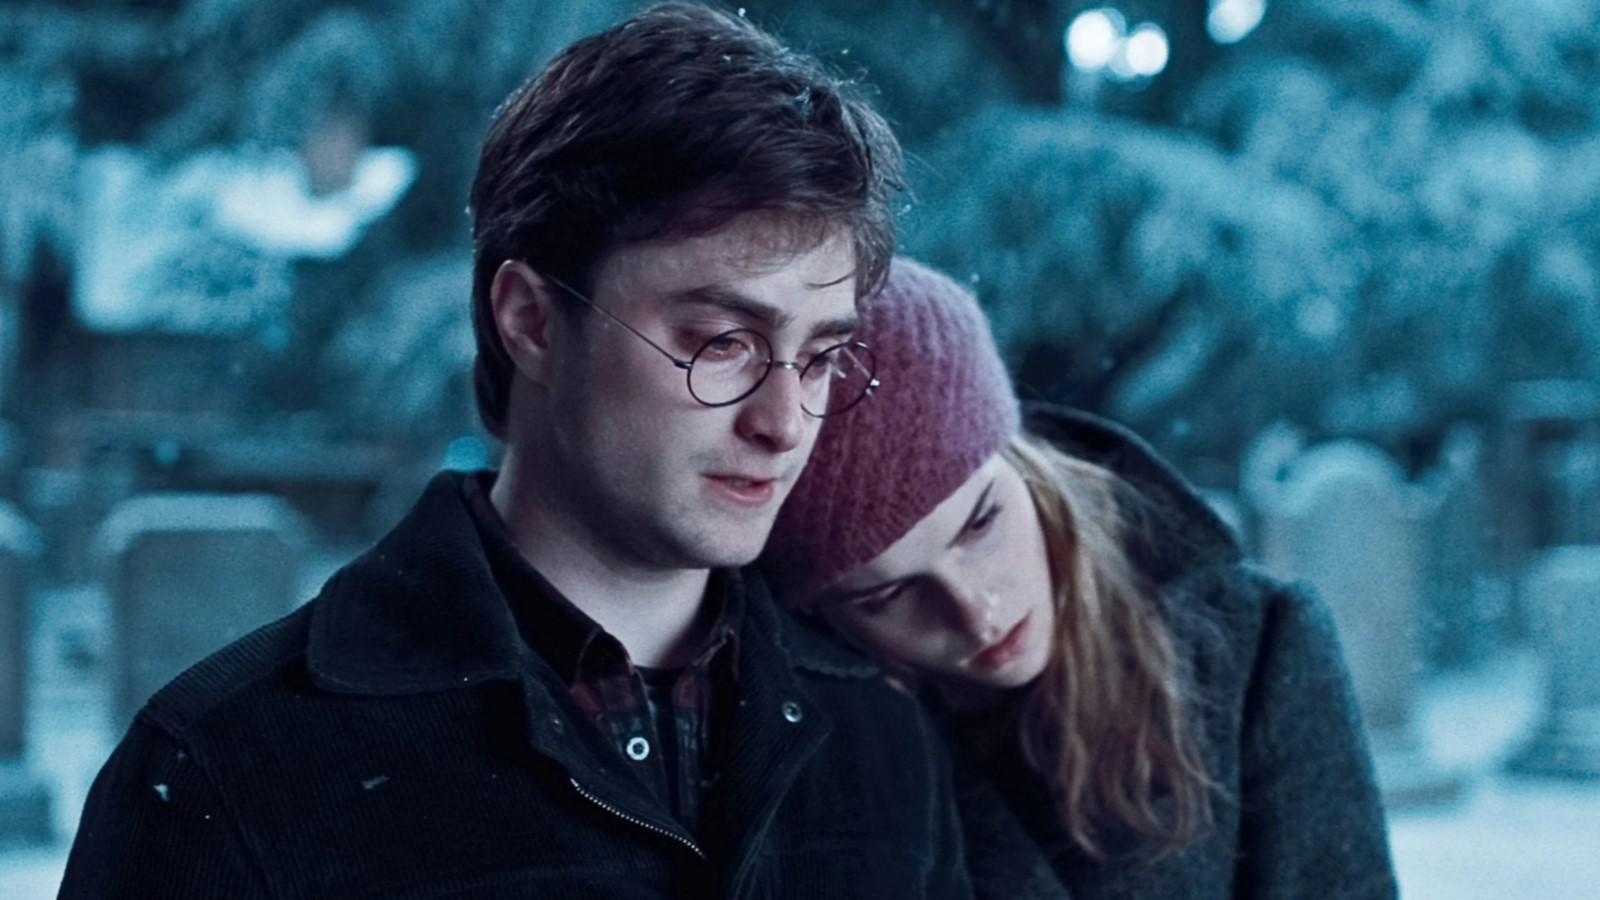 Harry and Hermione in Harry Potter standing in the snow, Hermione's head on Harry's shoulder